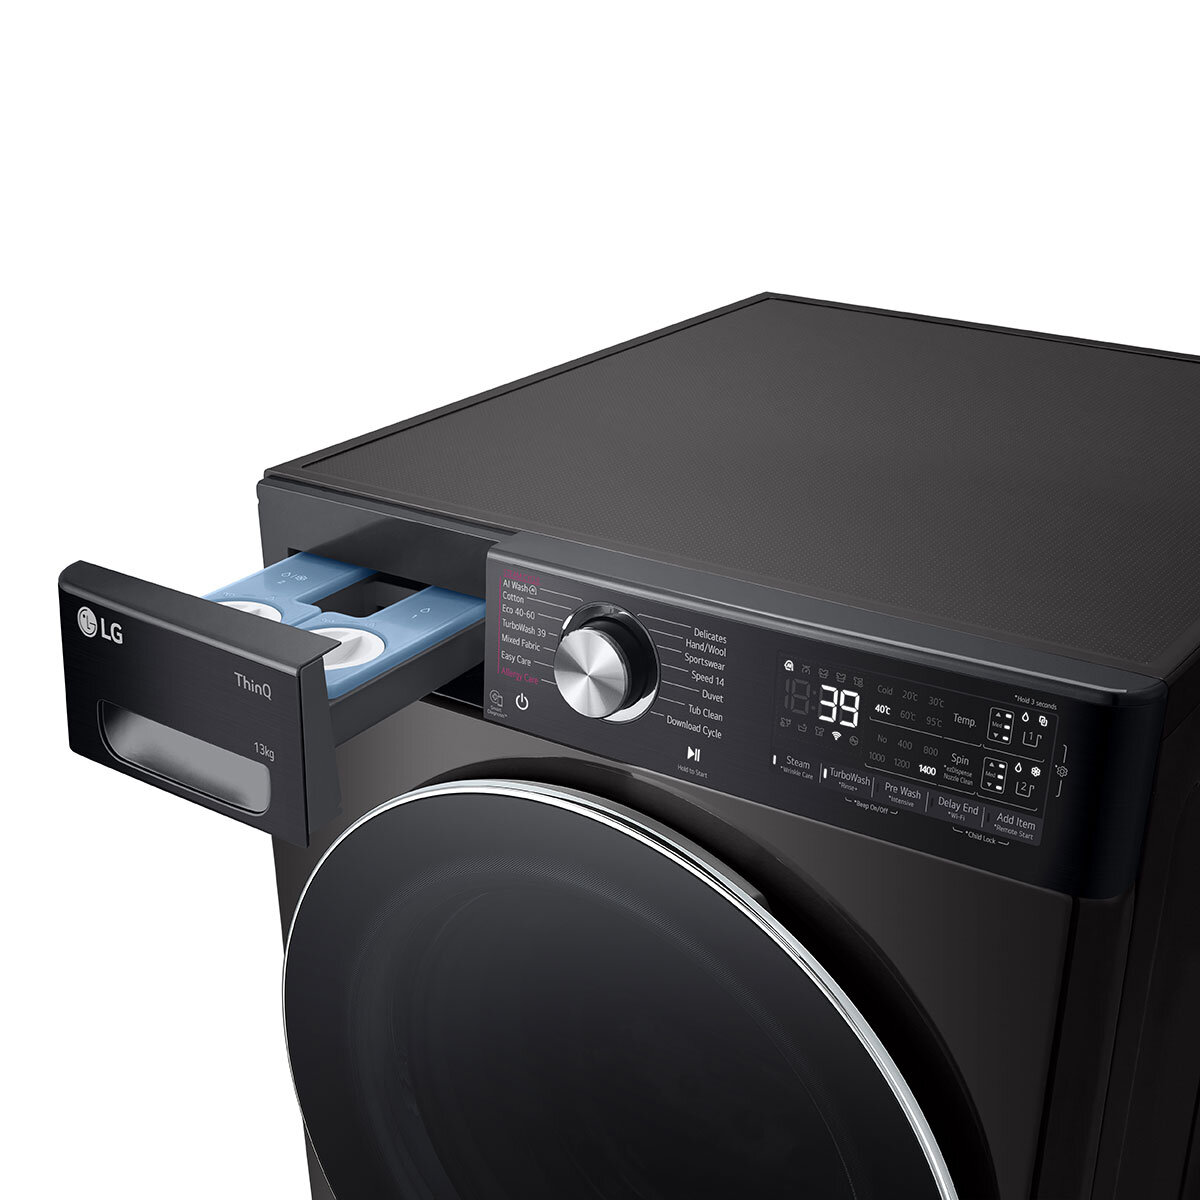 Detergent tray LG F4Y913BCTA1 WiFi-enabled 13 kg 1400 Spin Washing Machine, A Rated in Black